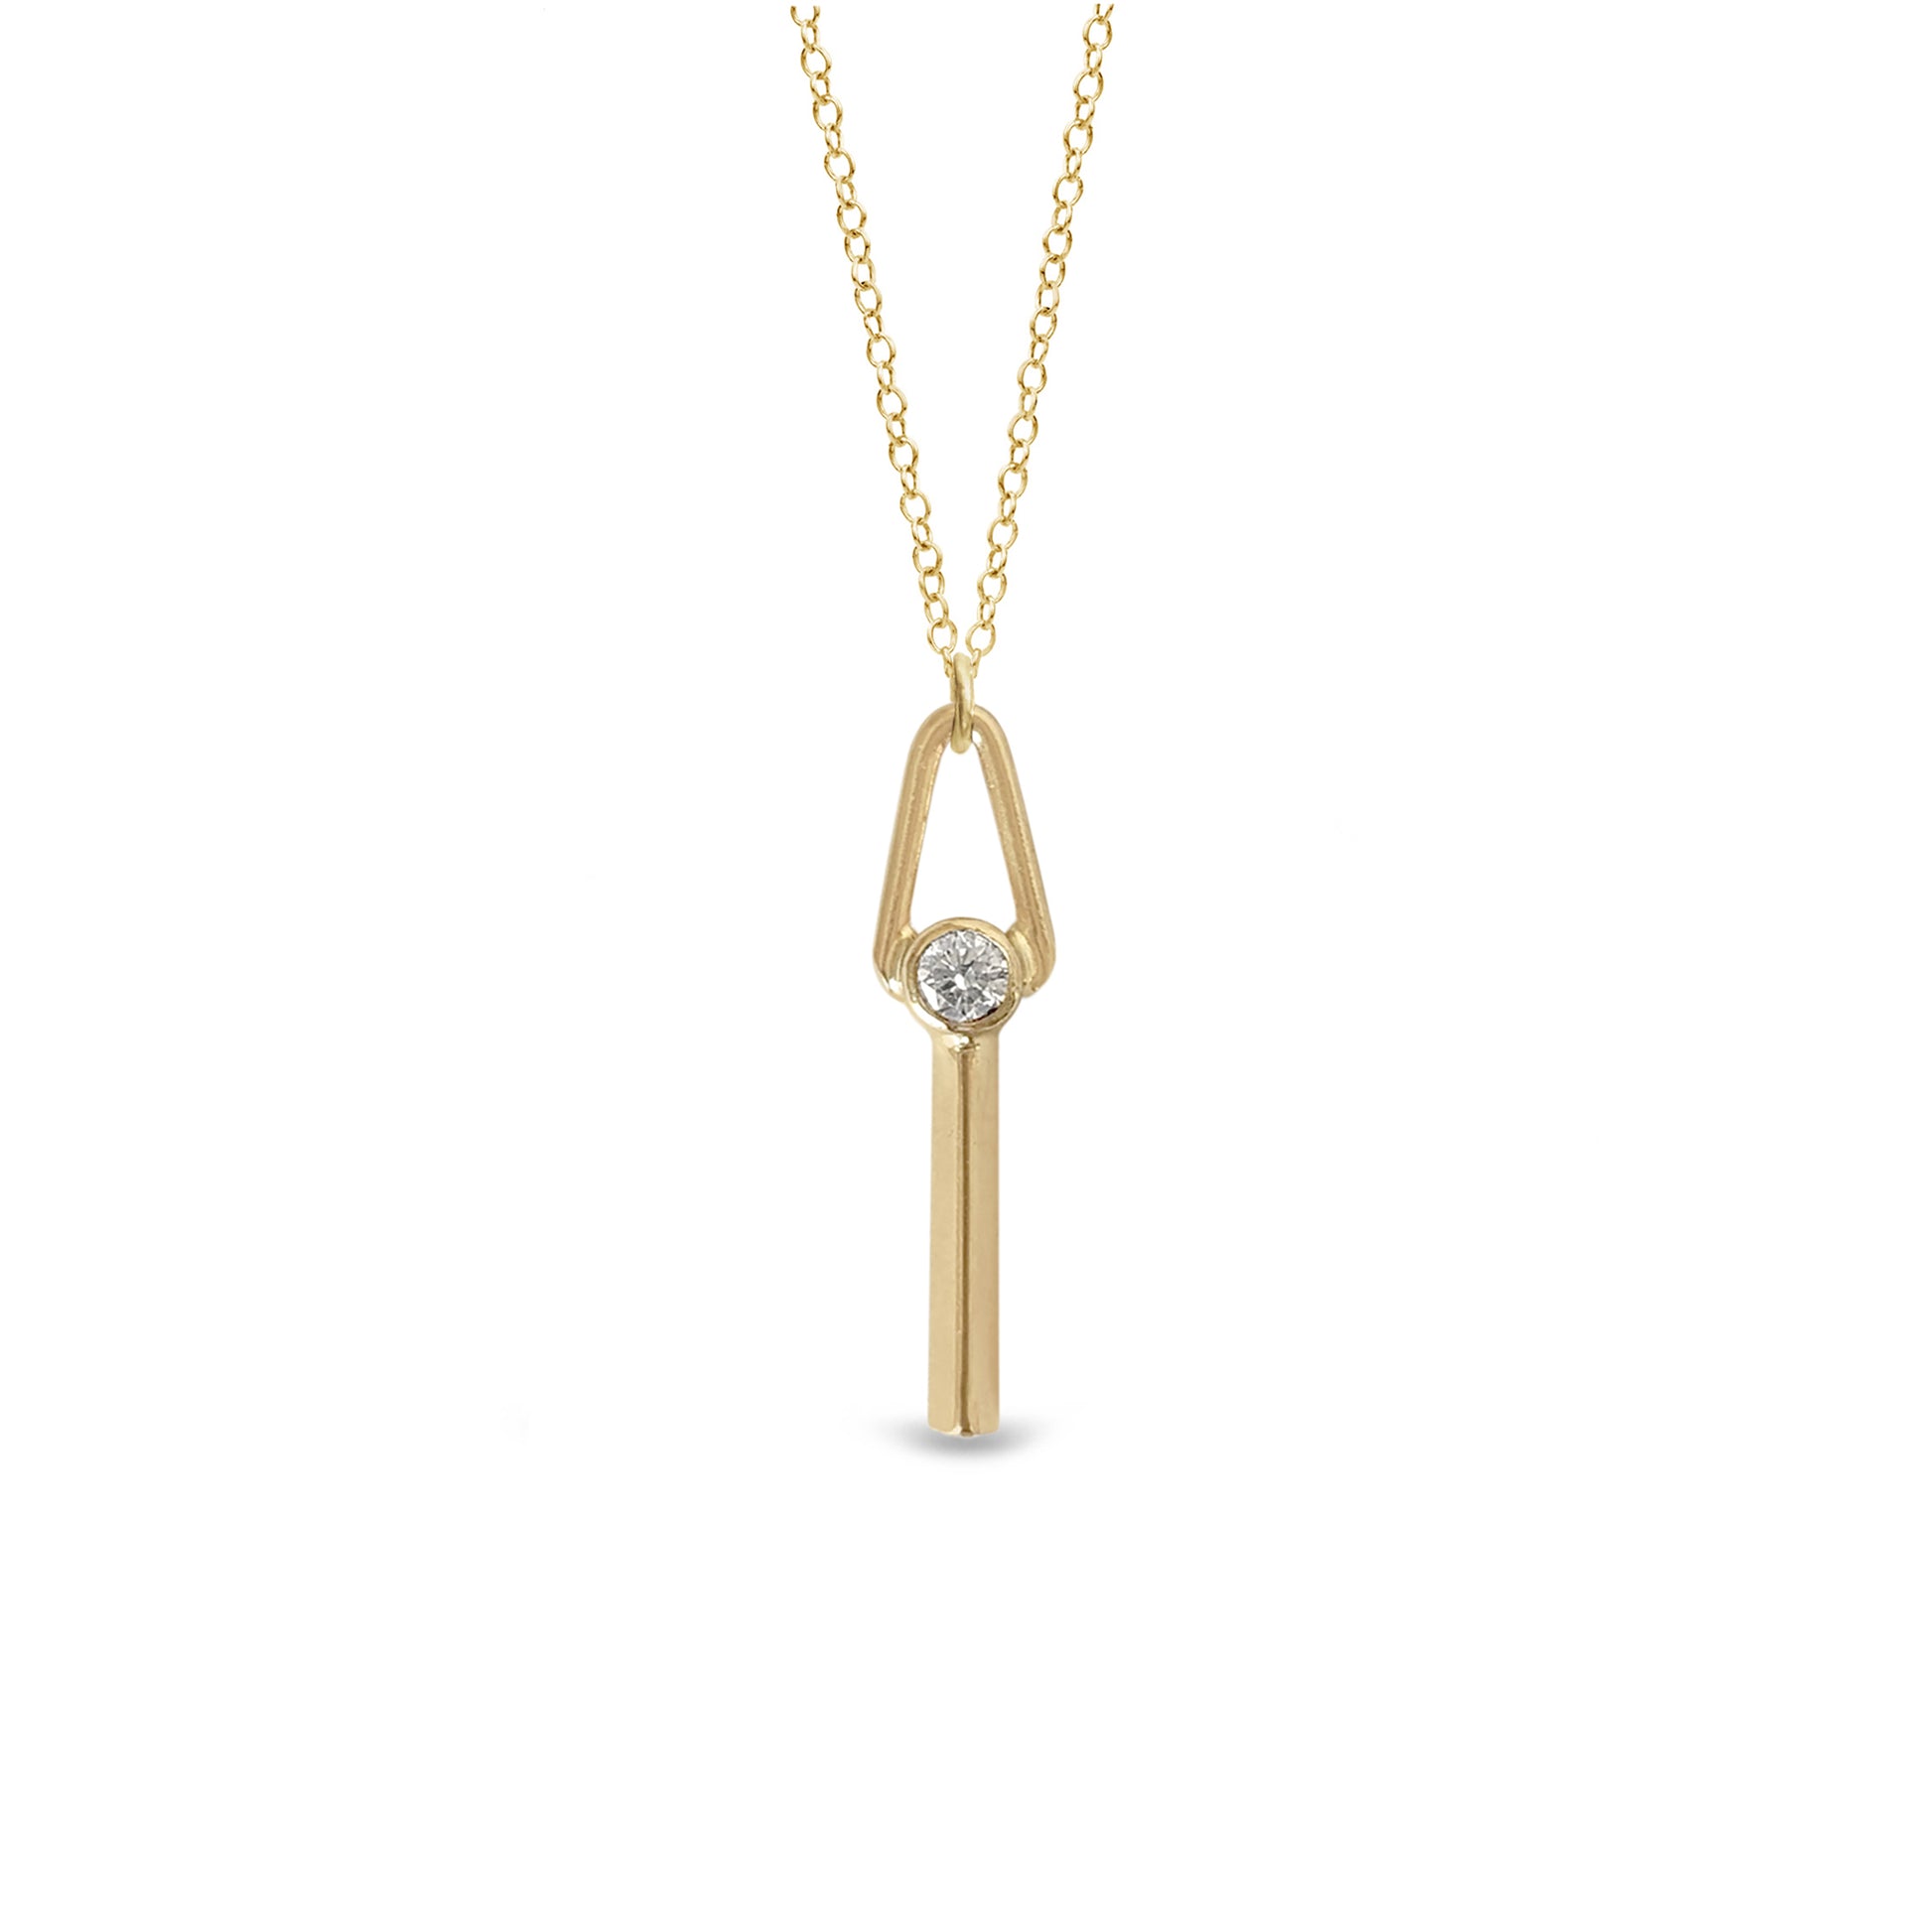 14K gold arch and bar diamond necklace